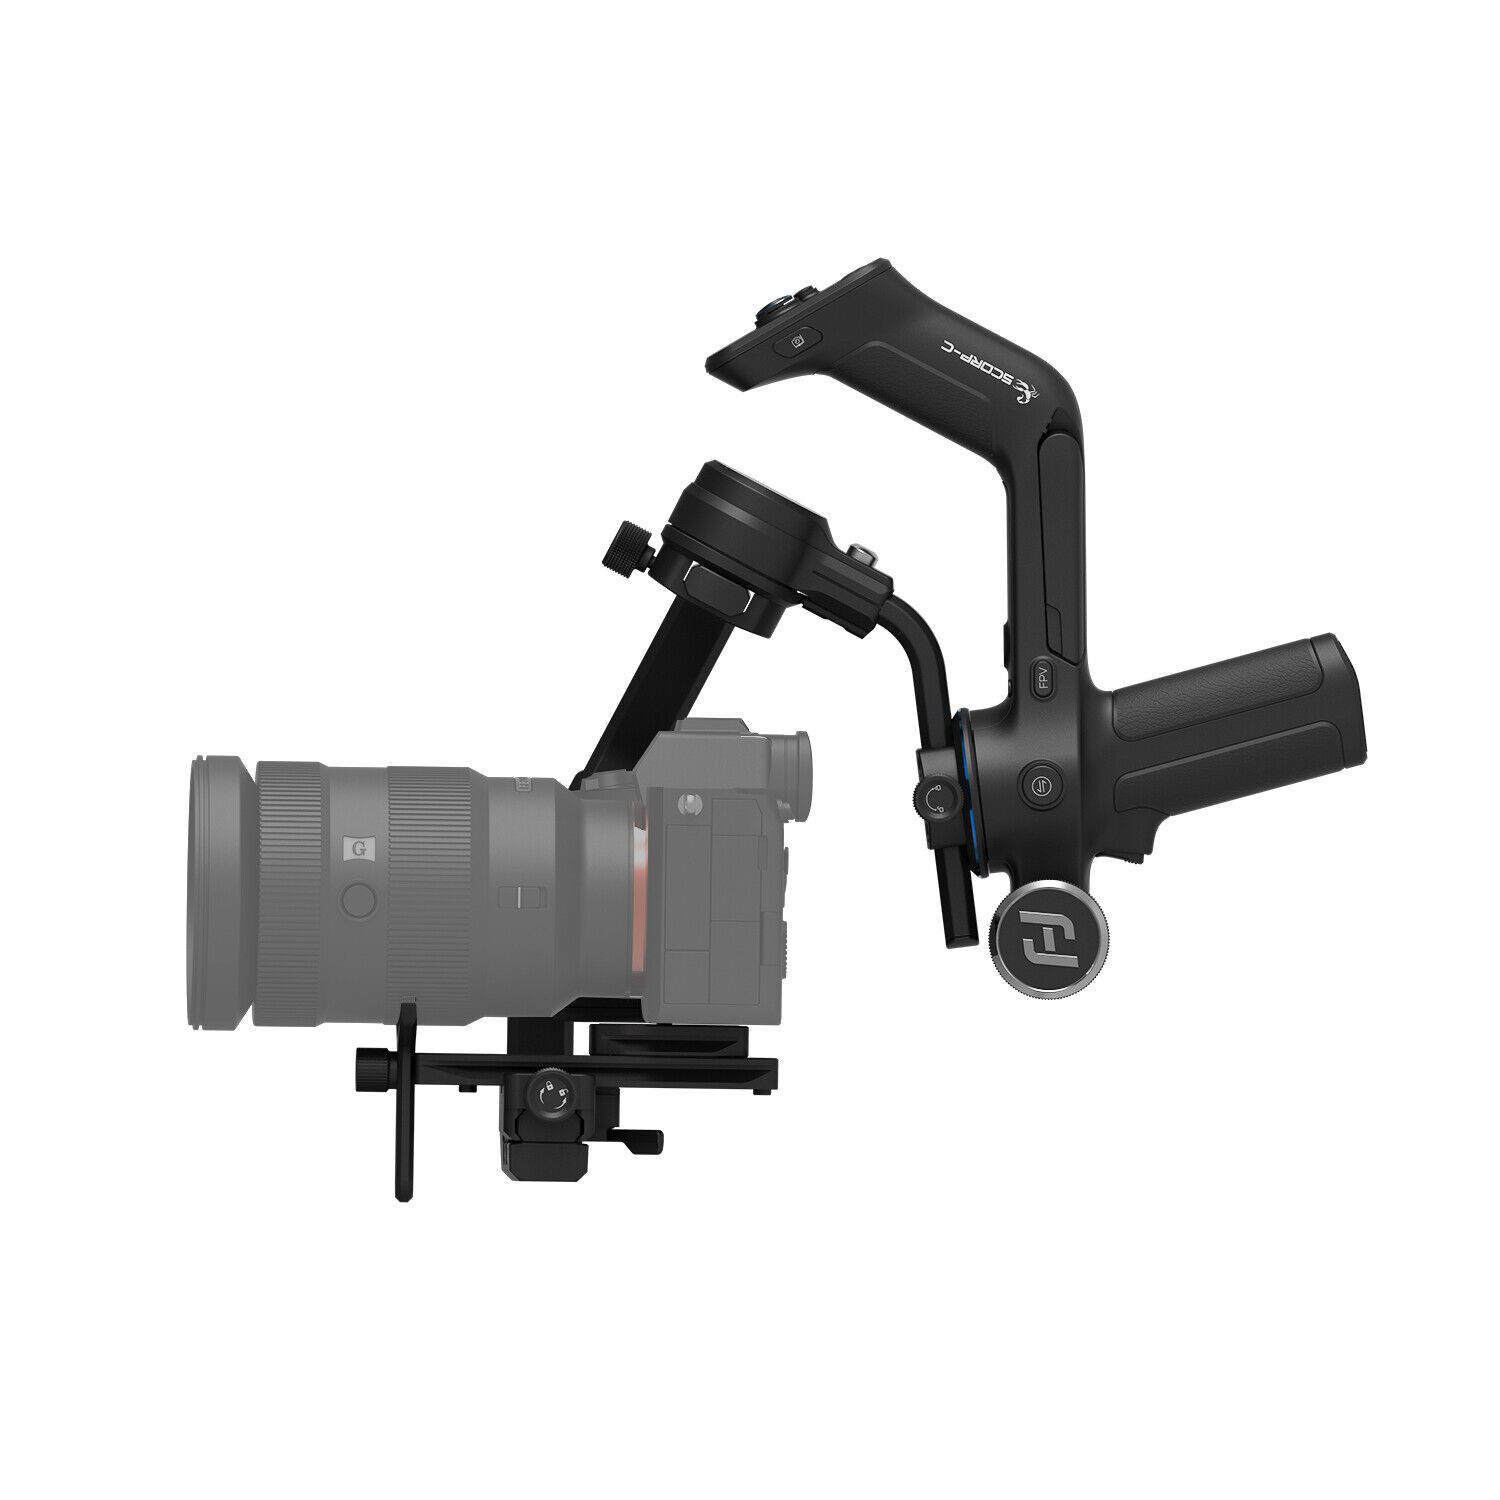 FeiyuTech SCORP-C 3-Axis Camera Gimbal Stabilizer for Filming Travel Video Vlog